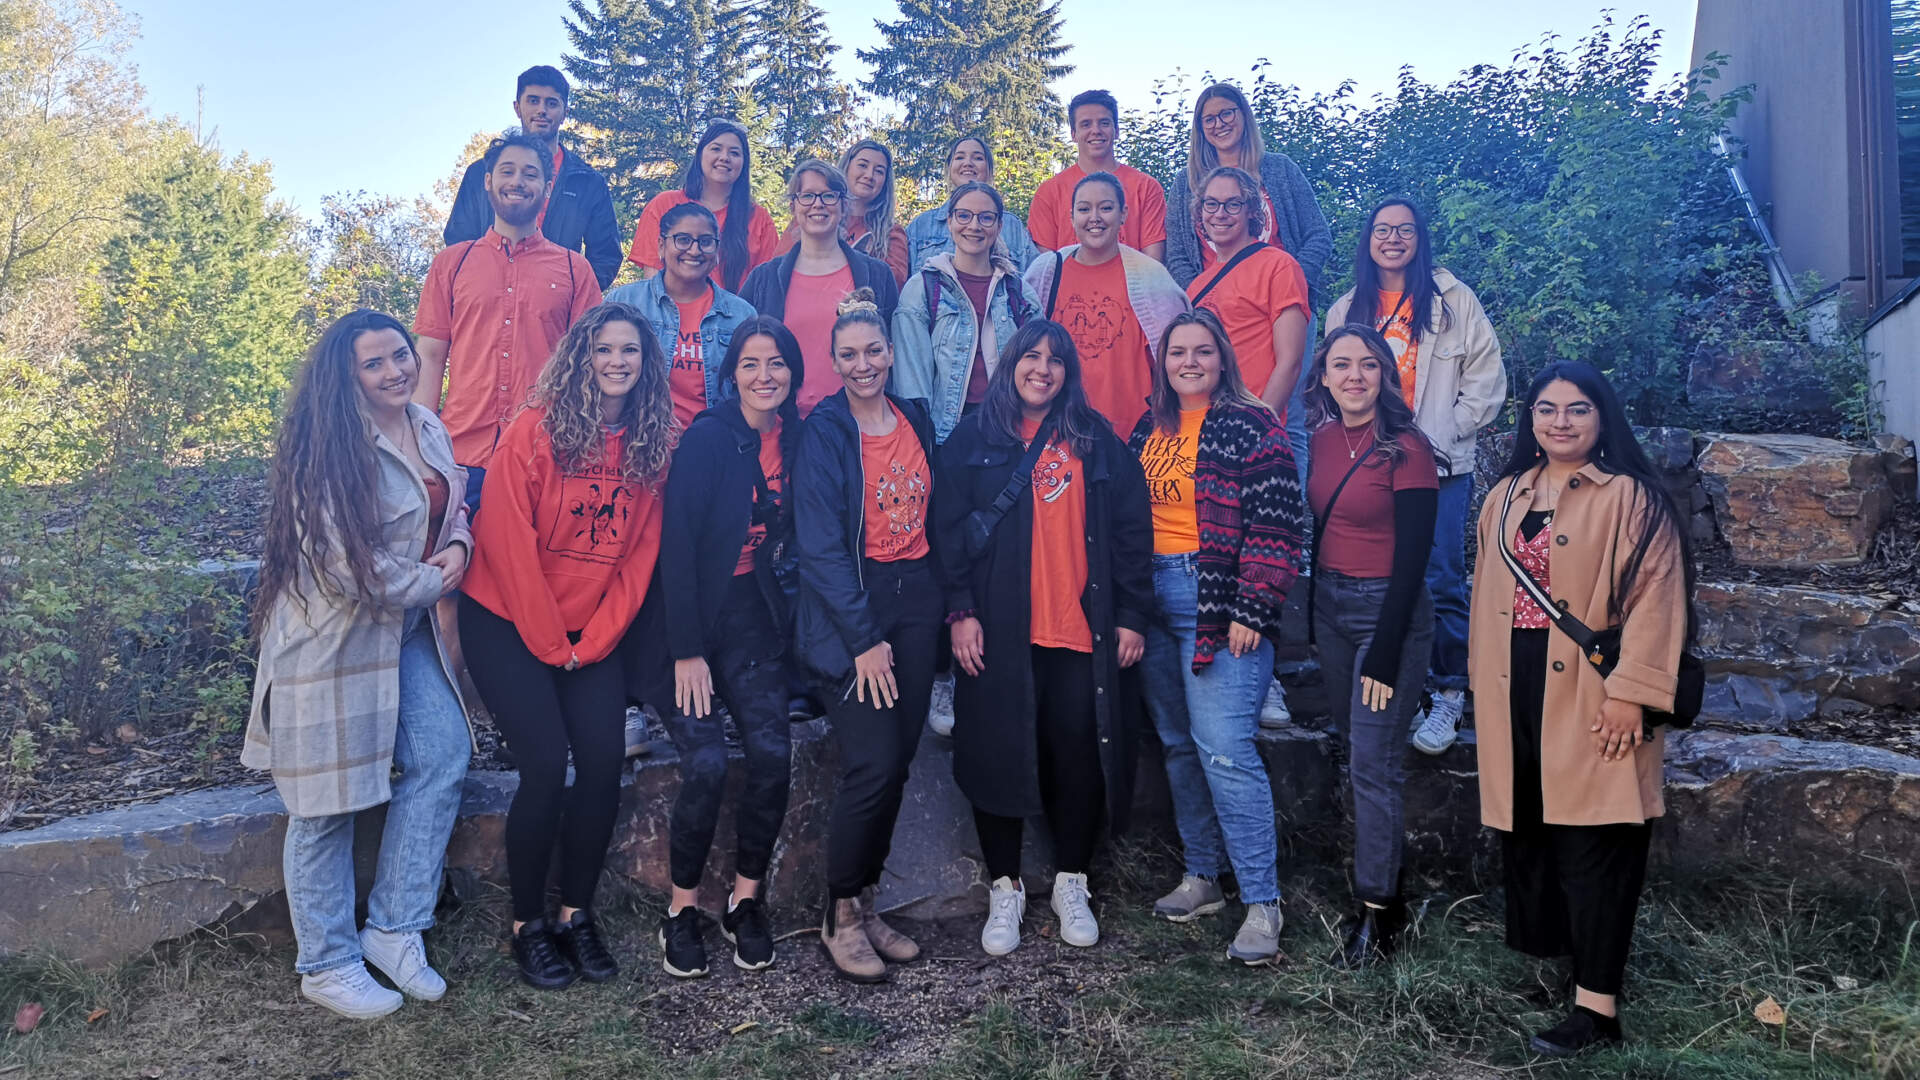 A group of smiling SACE staff in orange shirts stands together in front of a monument at Fort Edmonton Park.